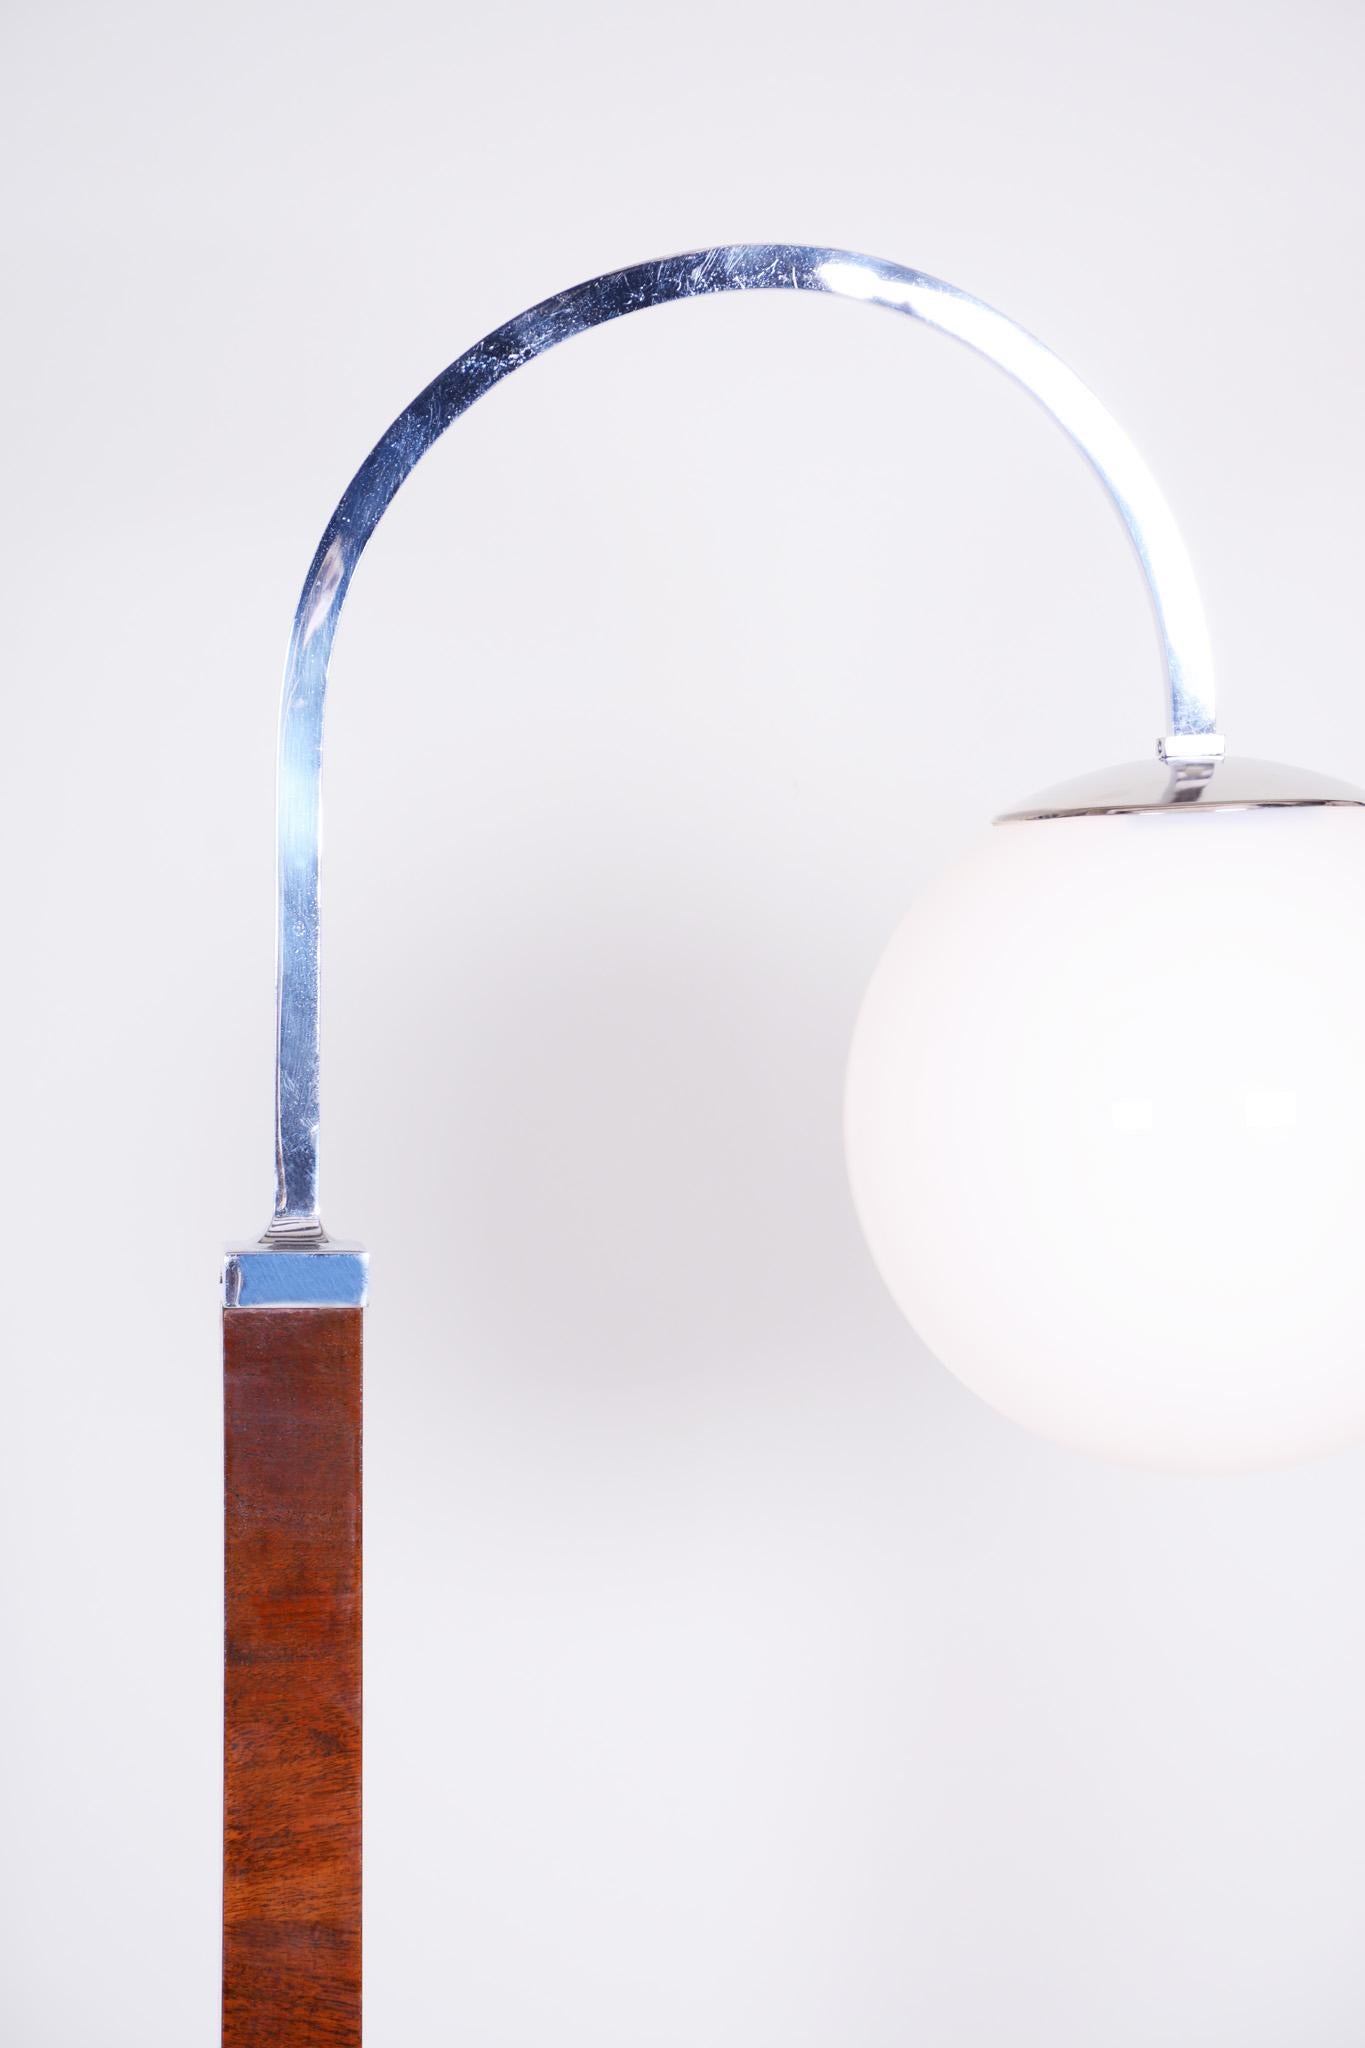 Completely restored with new electrification.

Source: Czechoslovakia
Style: Art Deco.
Period: 1920-1929.
Material: Walnut, chrome-plated steel and milk glass.